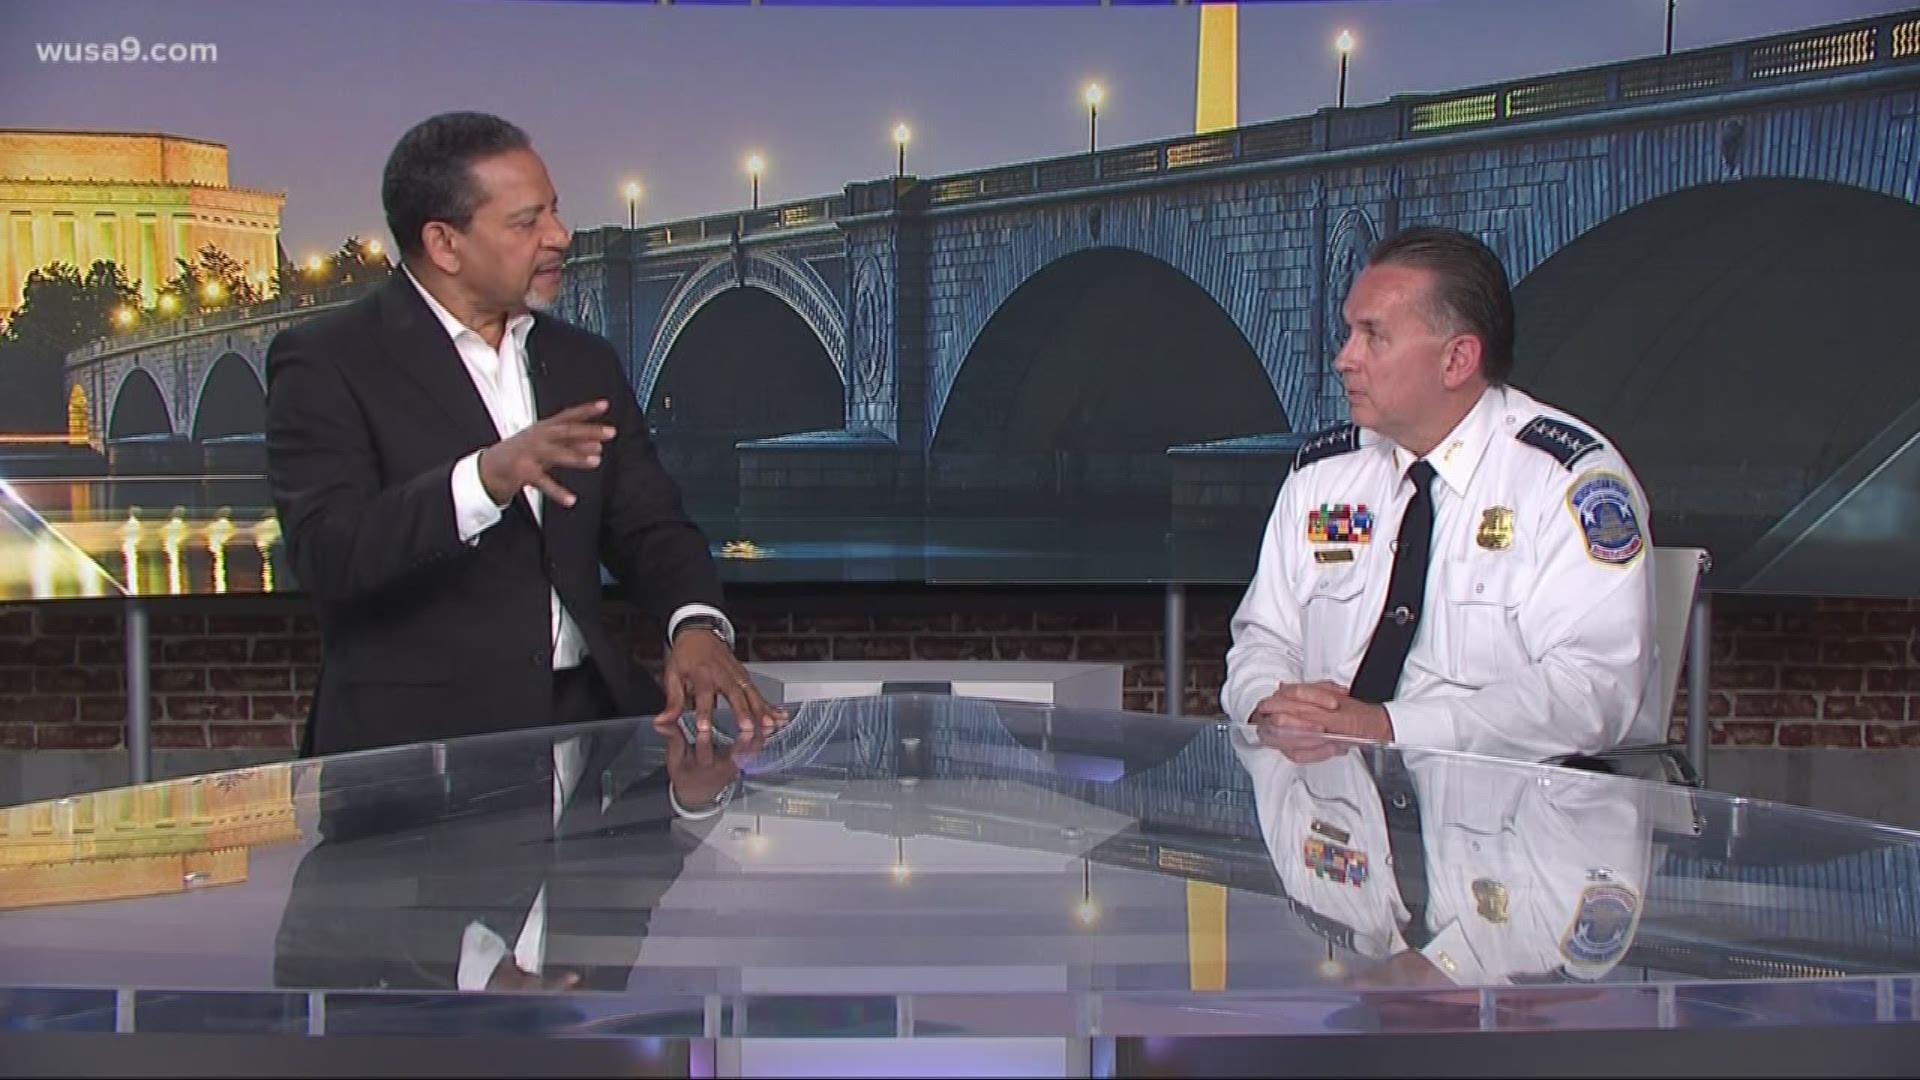 The Mayor and Police Chief under pressure to slow gun violence in DC. If you're a felon and caught with a gun in DC your case will be heading to Federal court. Bruce sits down for an exclusive interview with DC Police Chief Peter Newsham.